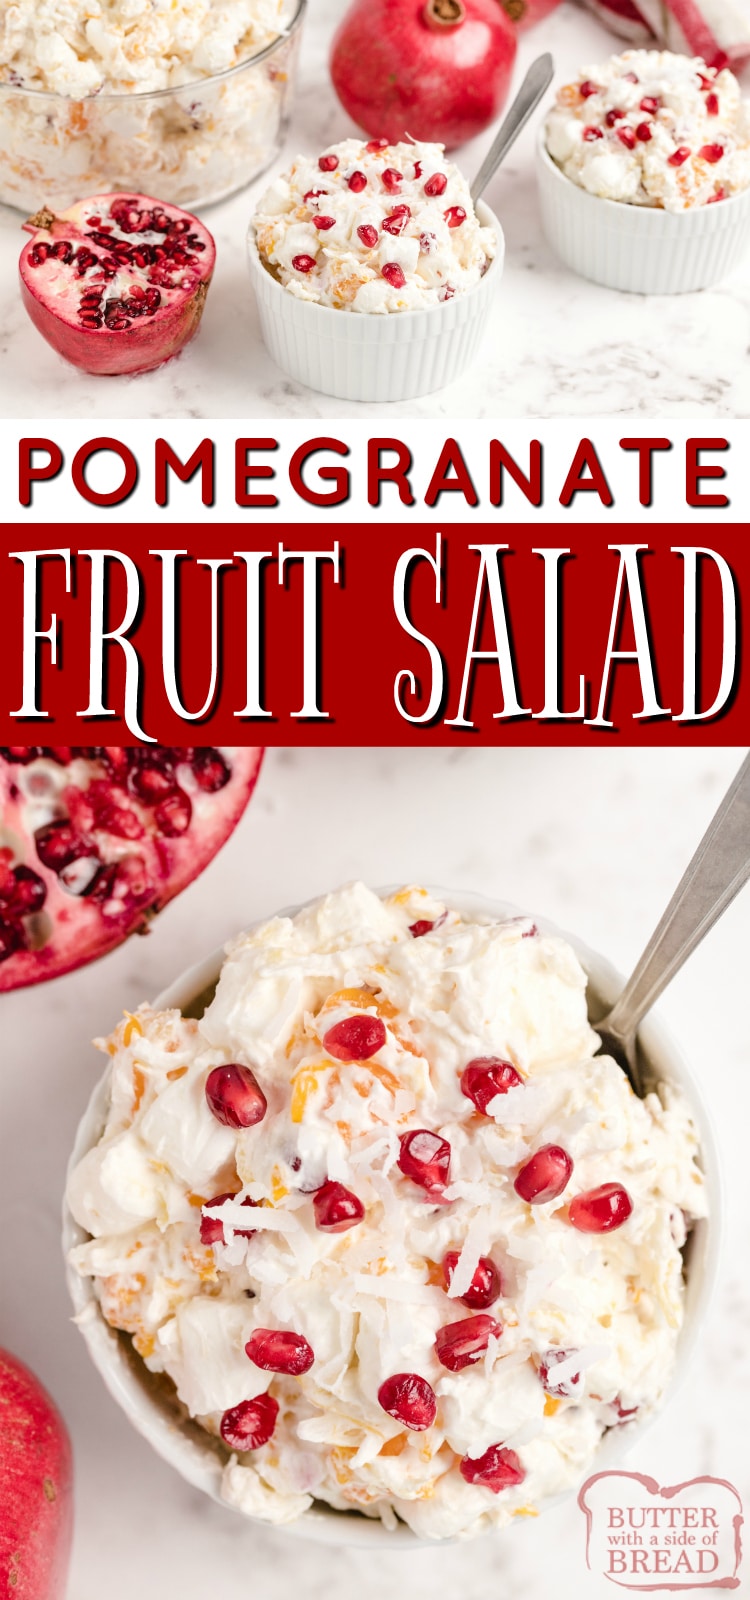 Creamy Pomegranate Fruit Salad made with pomegranates, fruit and marshmallows is sure to become a favorite holiday side dish! This simple fruit salad recipe is perfect for fall - it's been a family tradition to serve this for Thanksgiving for many years!